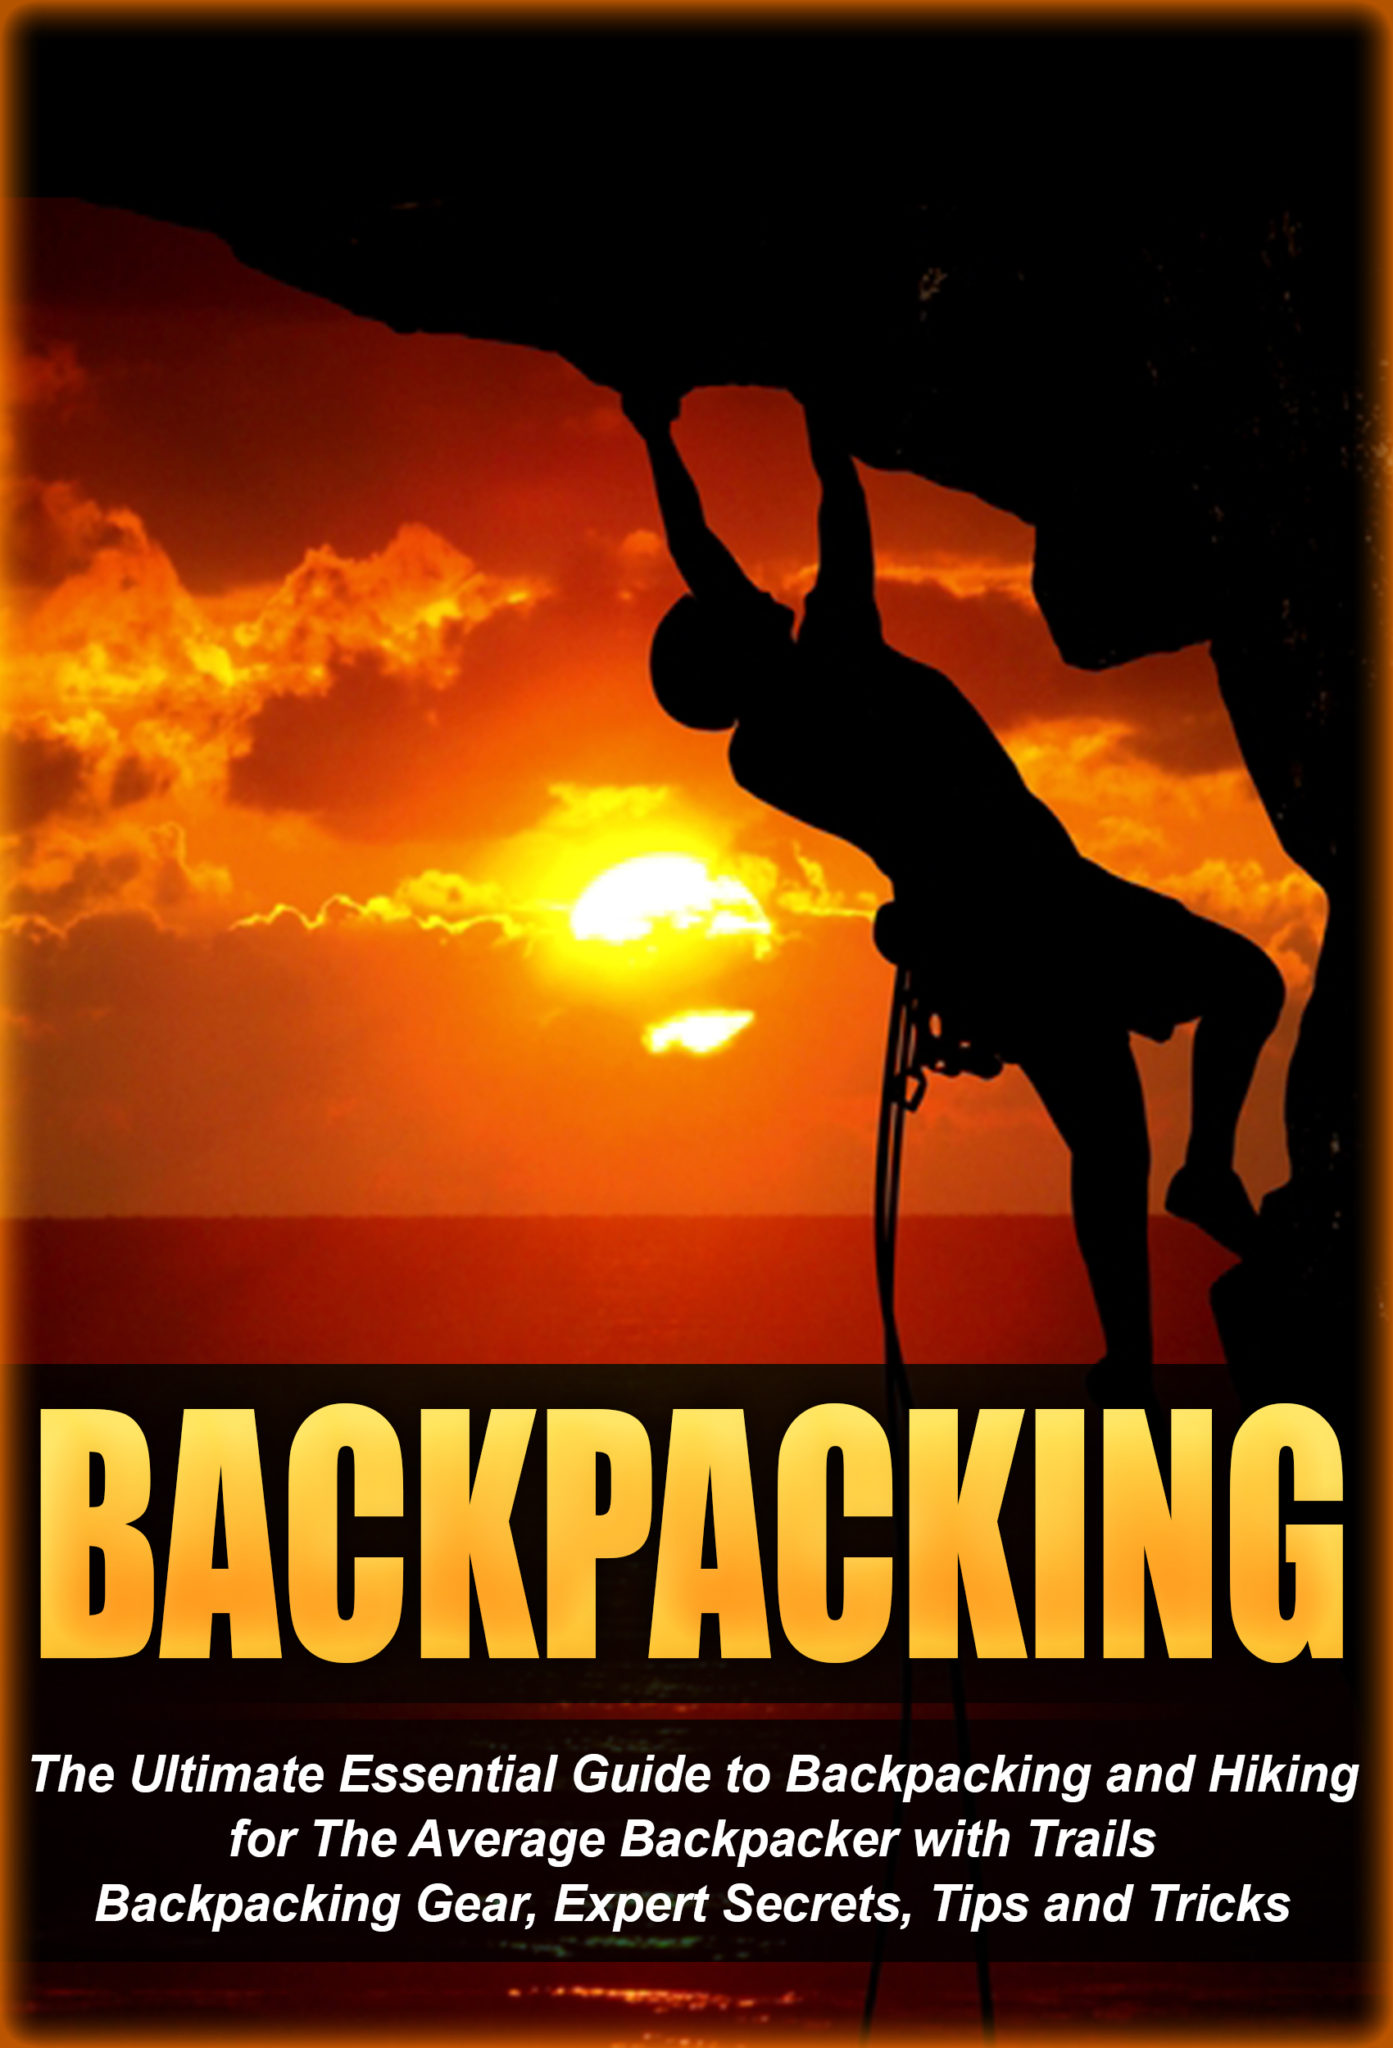 FREE: Backpacking: The Ultimate Essential Guide to Backpacking and Hiking for The Average Backpacker with Trails, Backpacking Gear, Expert Secrets, Tips and Tricks by Richard Wood